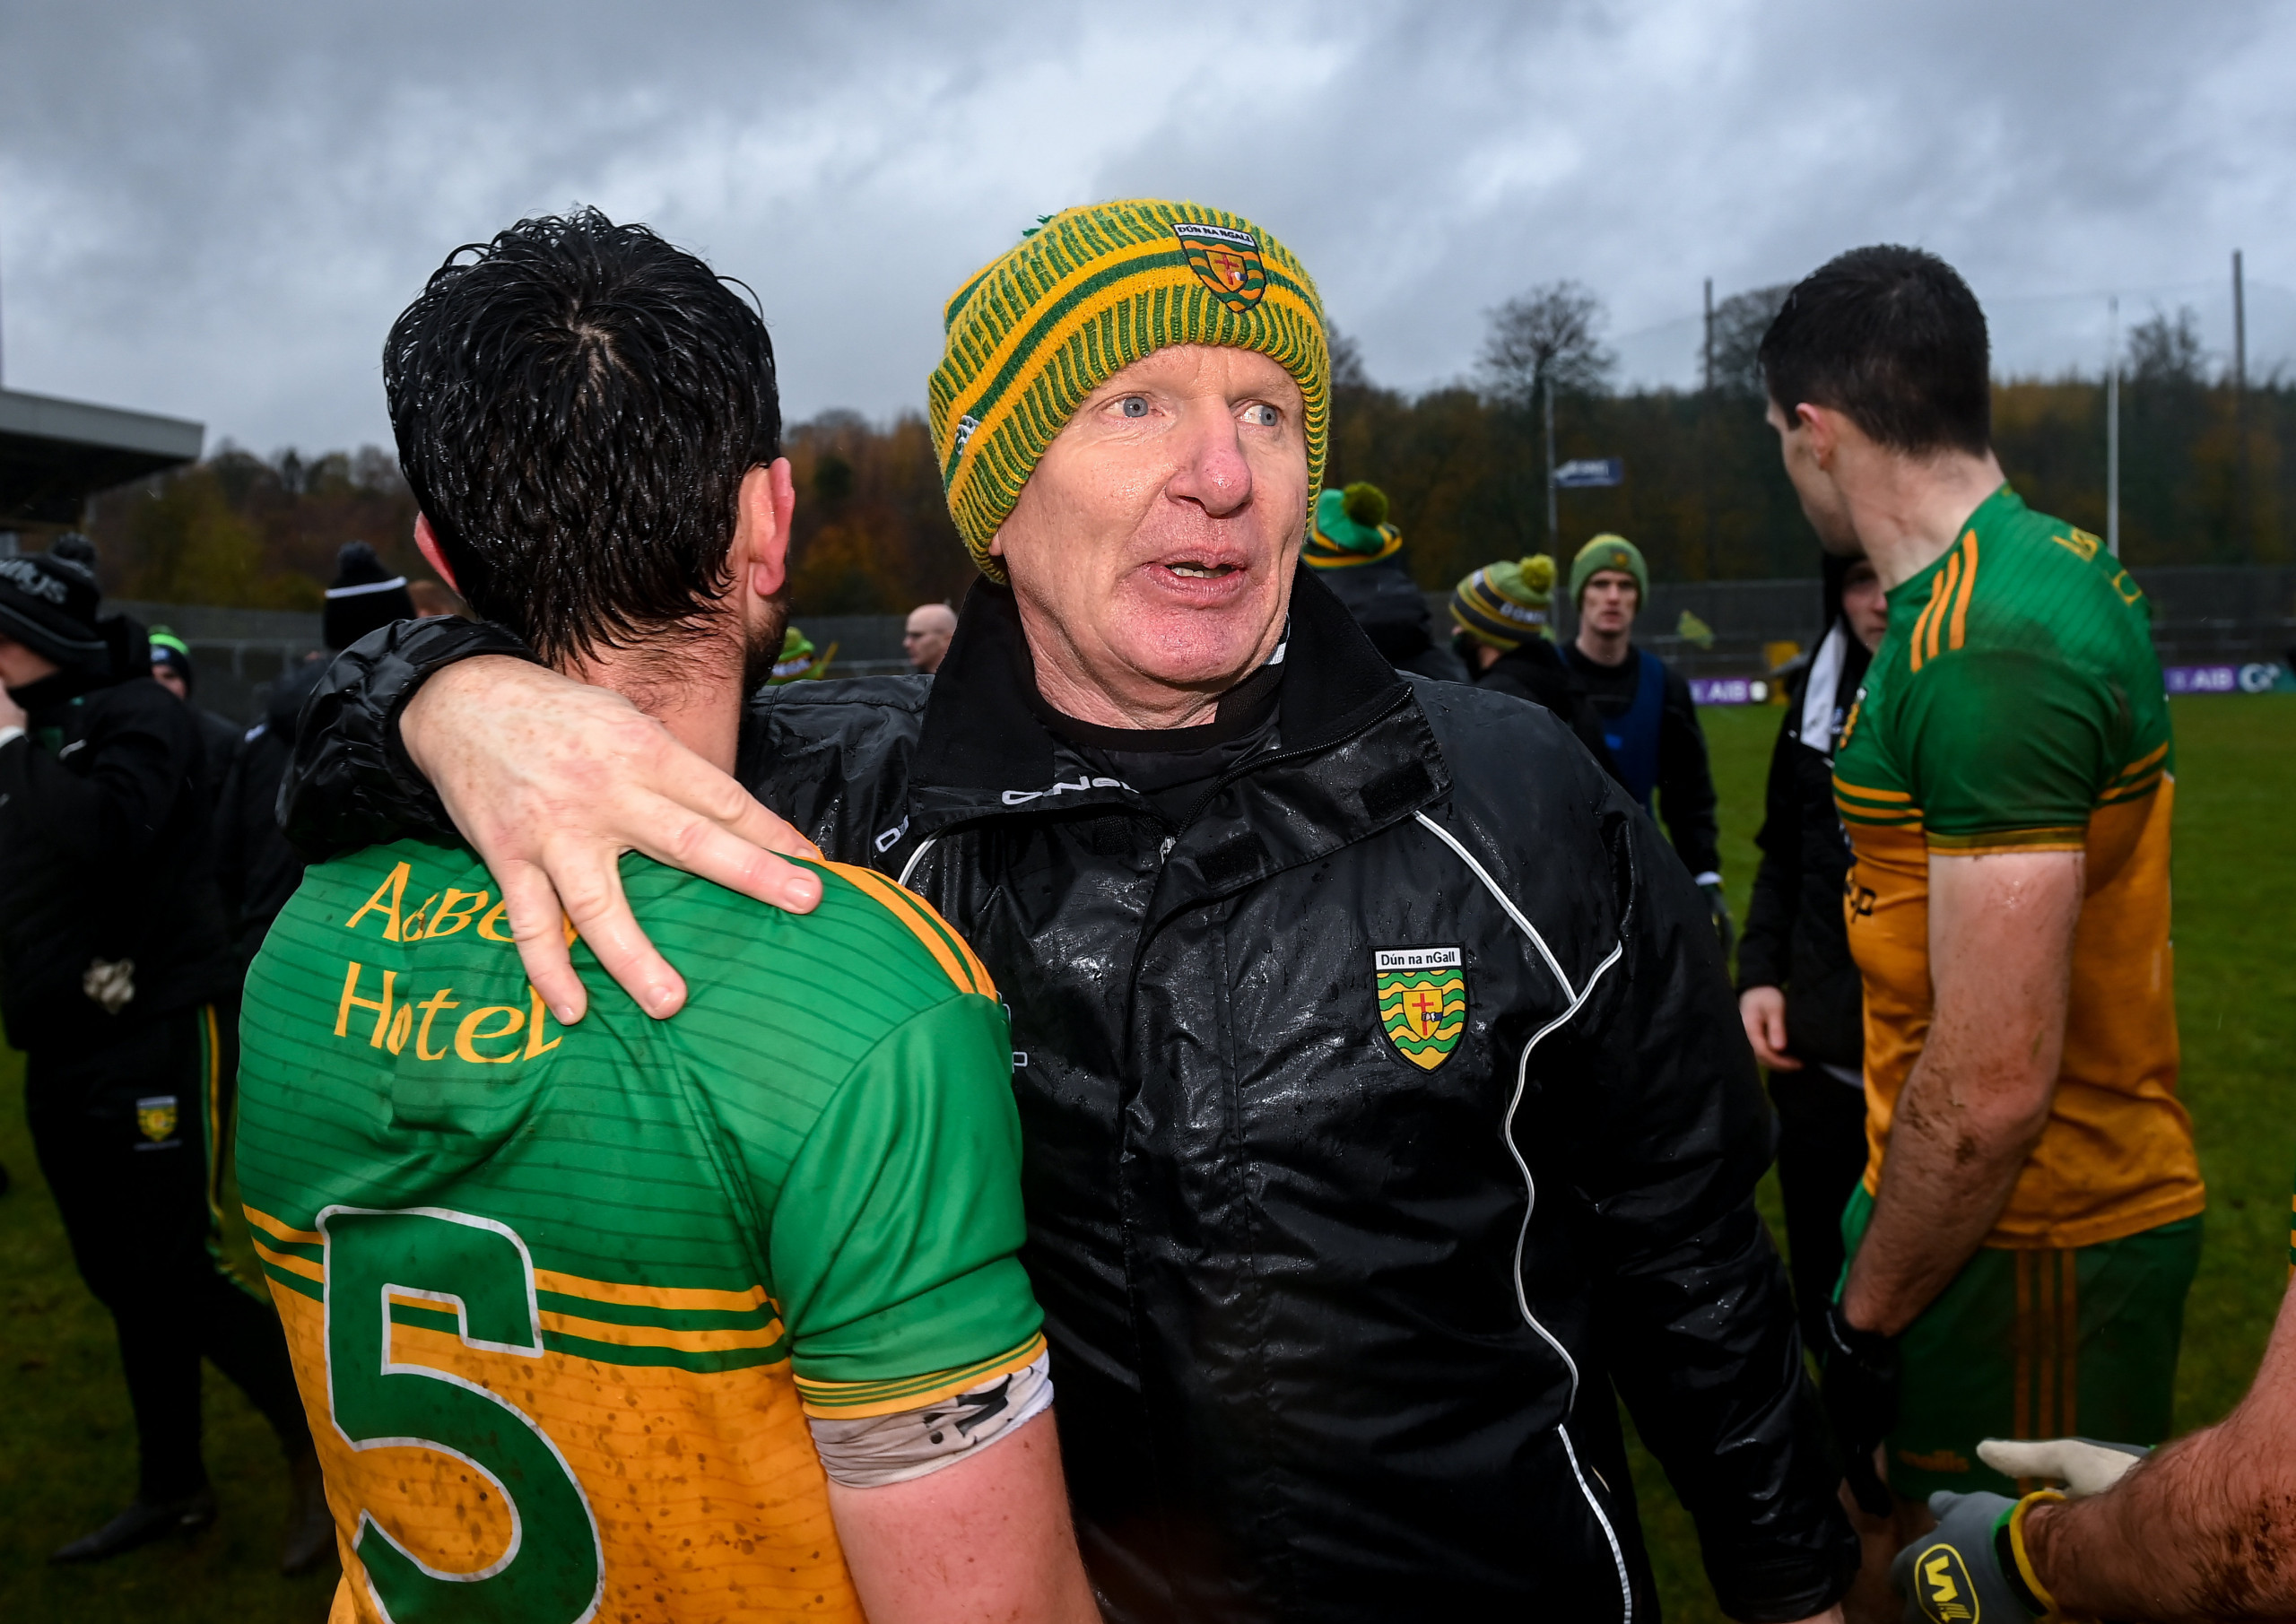 Ulster SFC Semi Final Preview: Armagh v Donegal